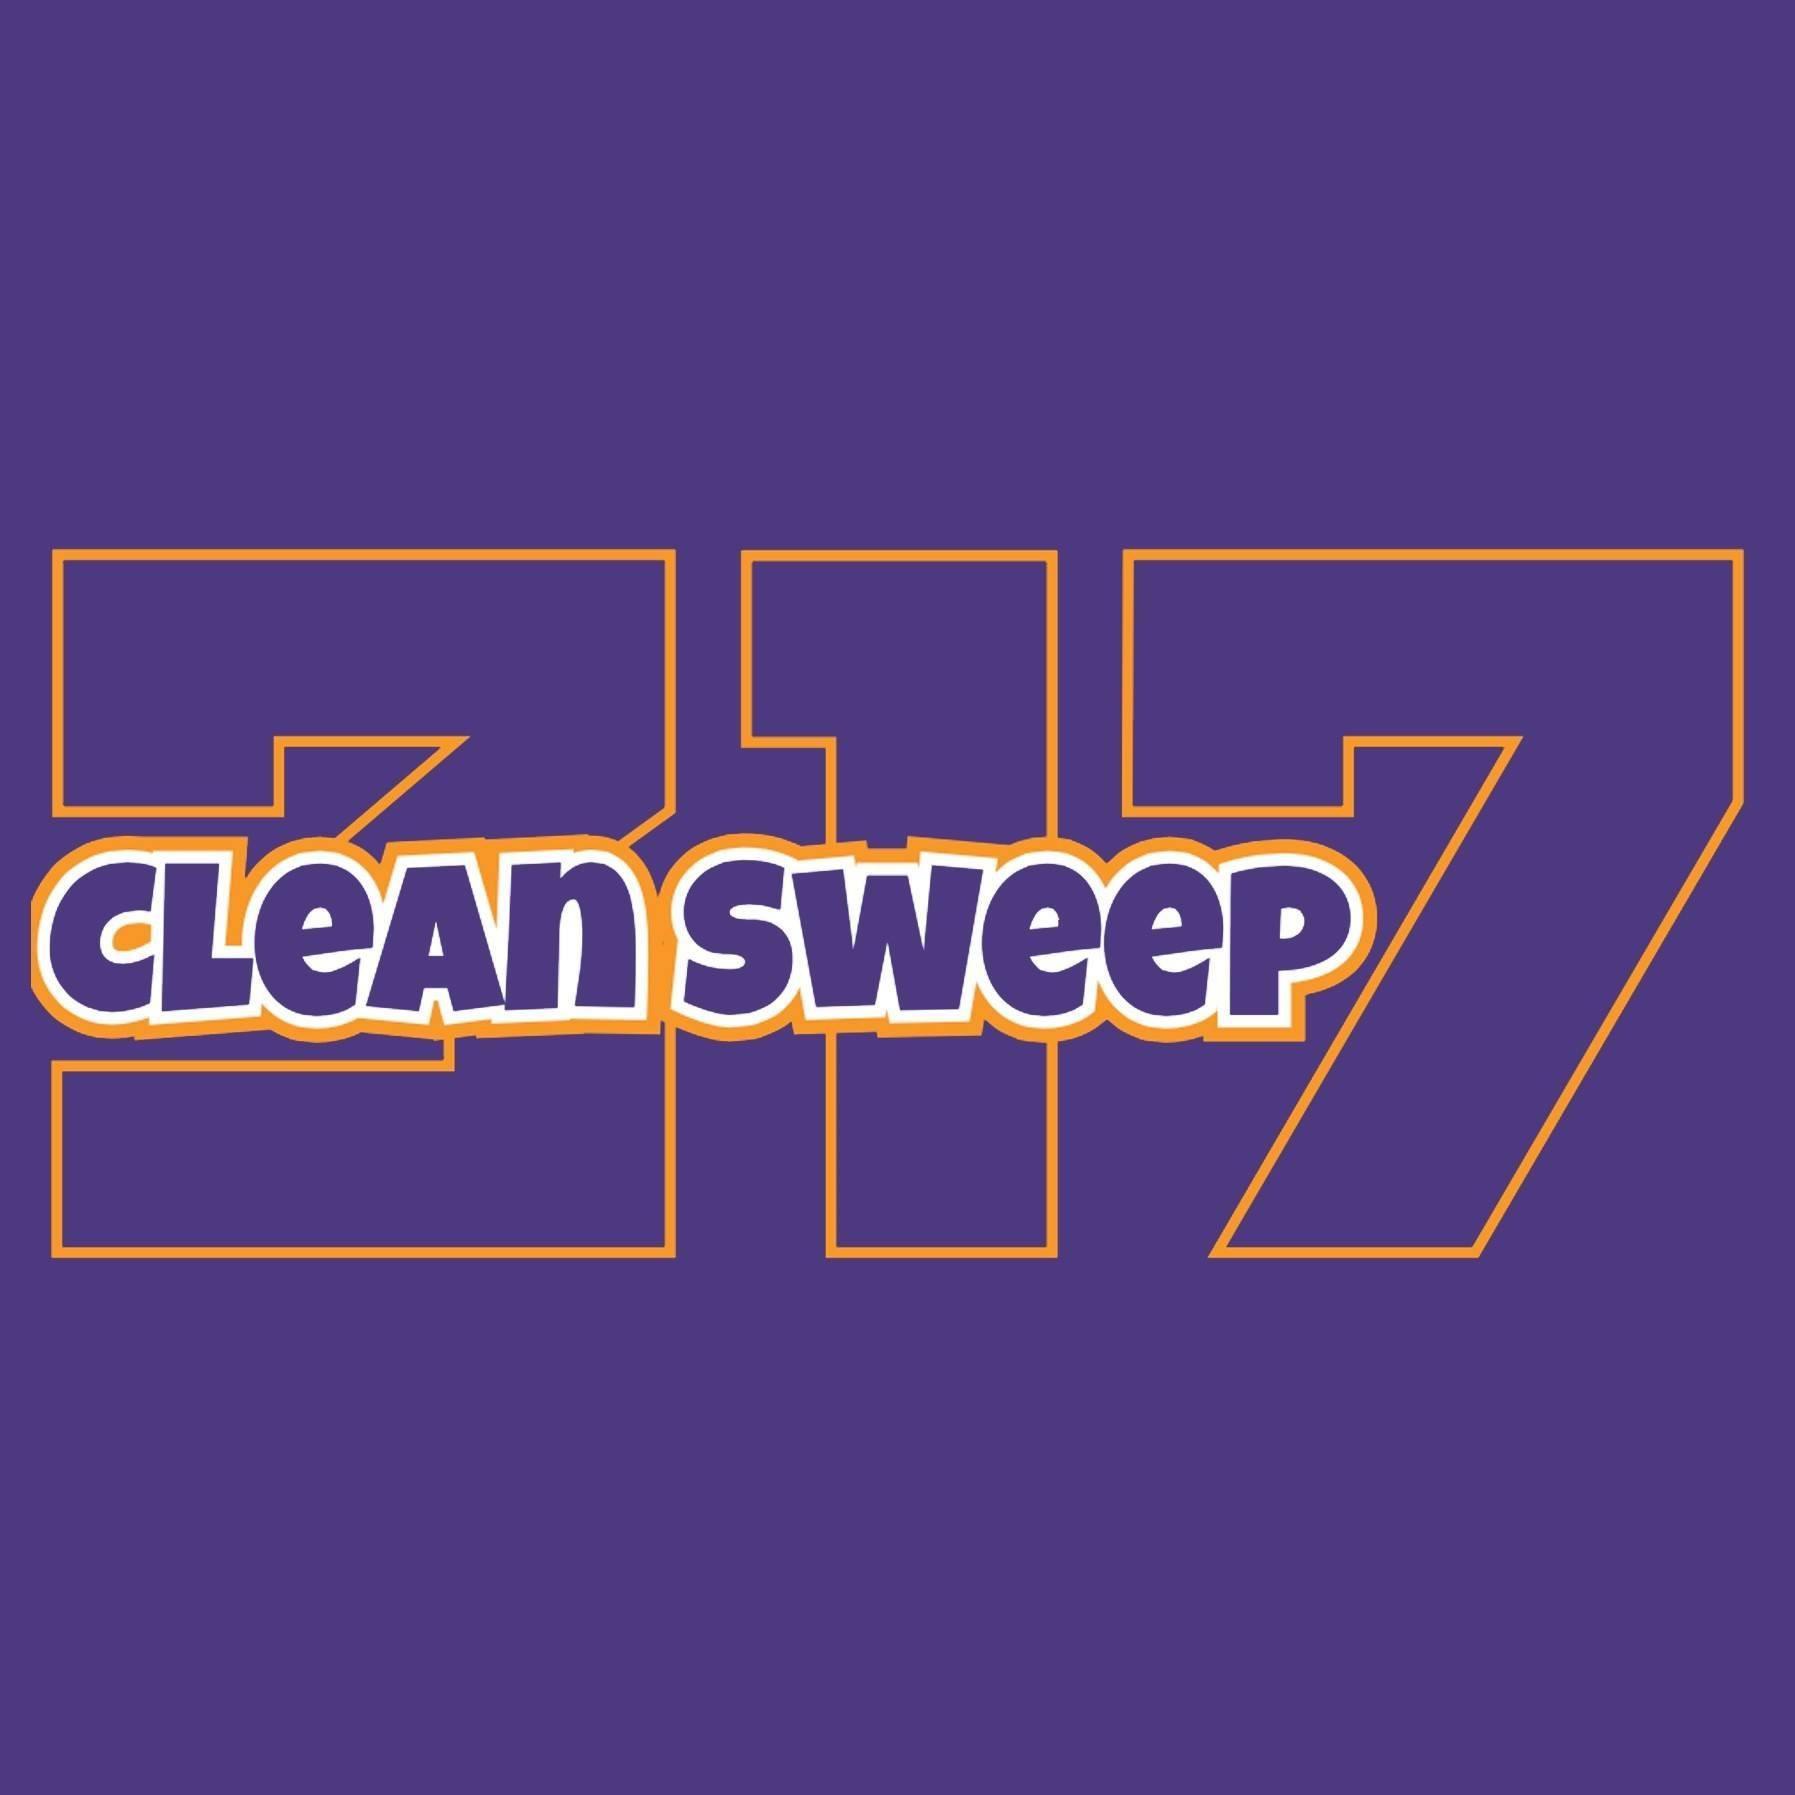 CLEAN SWEEP 317 - Indianapolis, IN 46220 - (317)643-1128 | ShowMeLocal.com